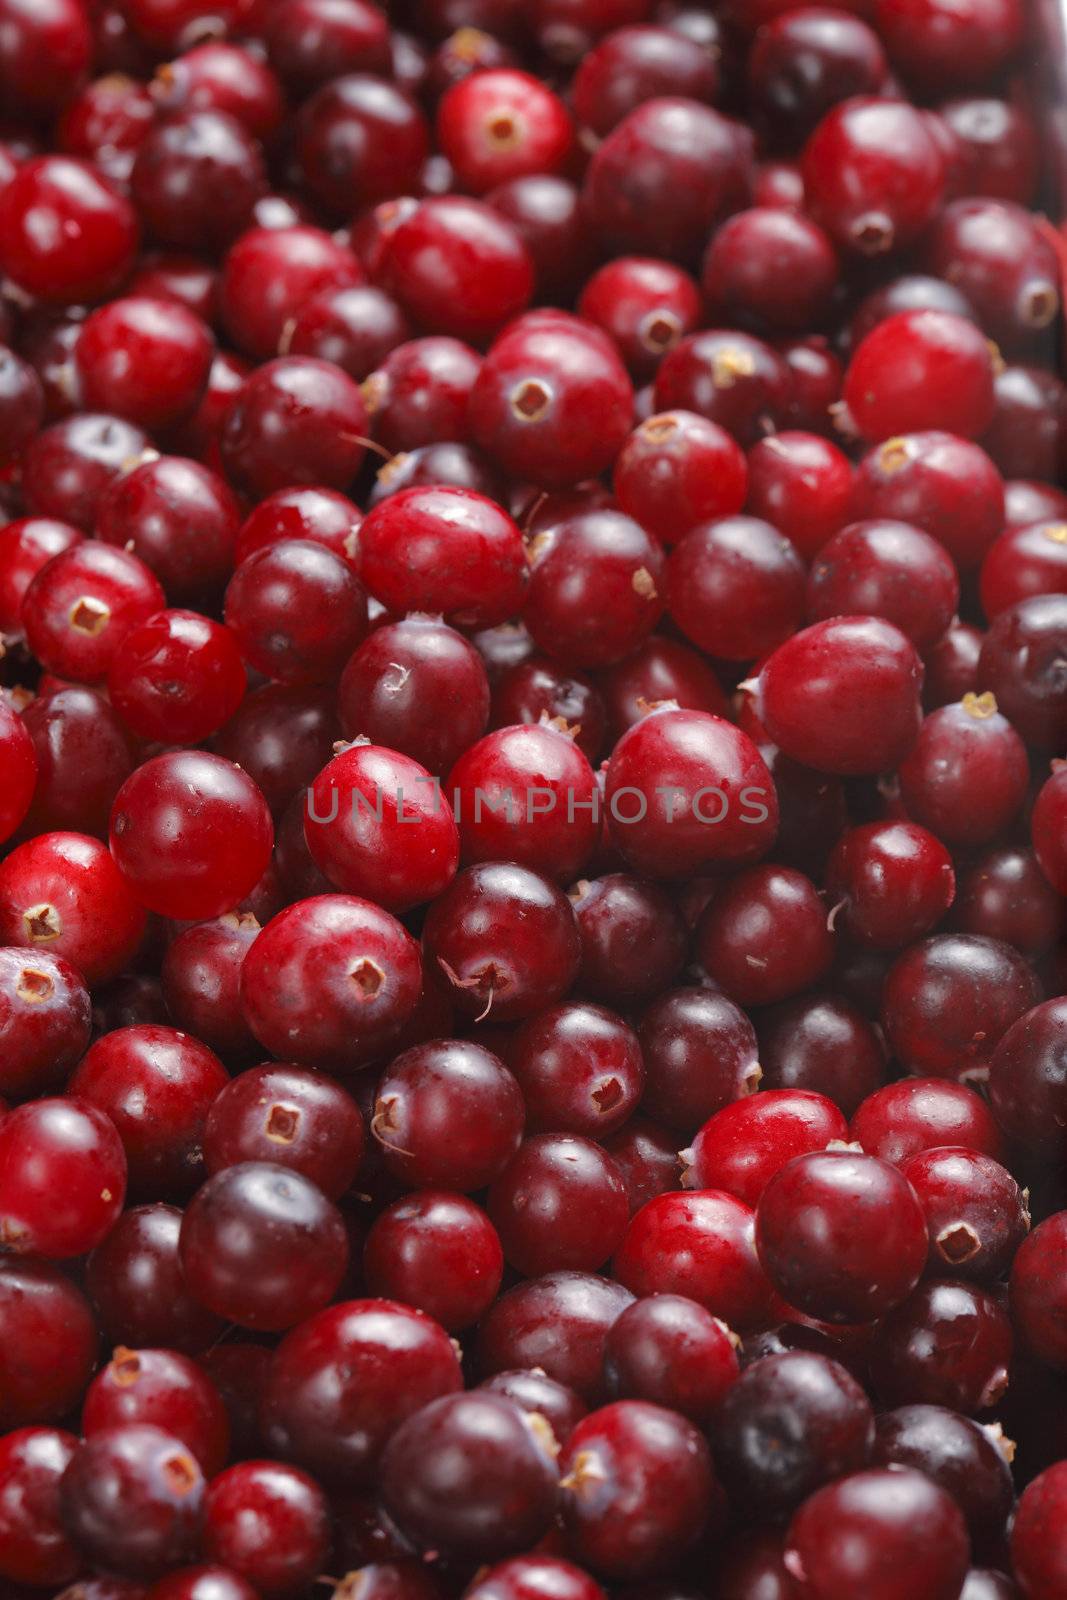 Red cranberries in a background texture